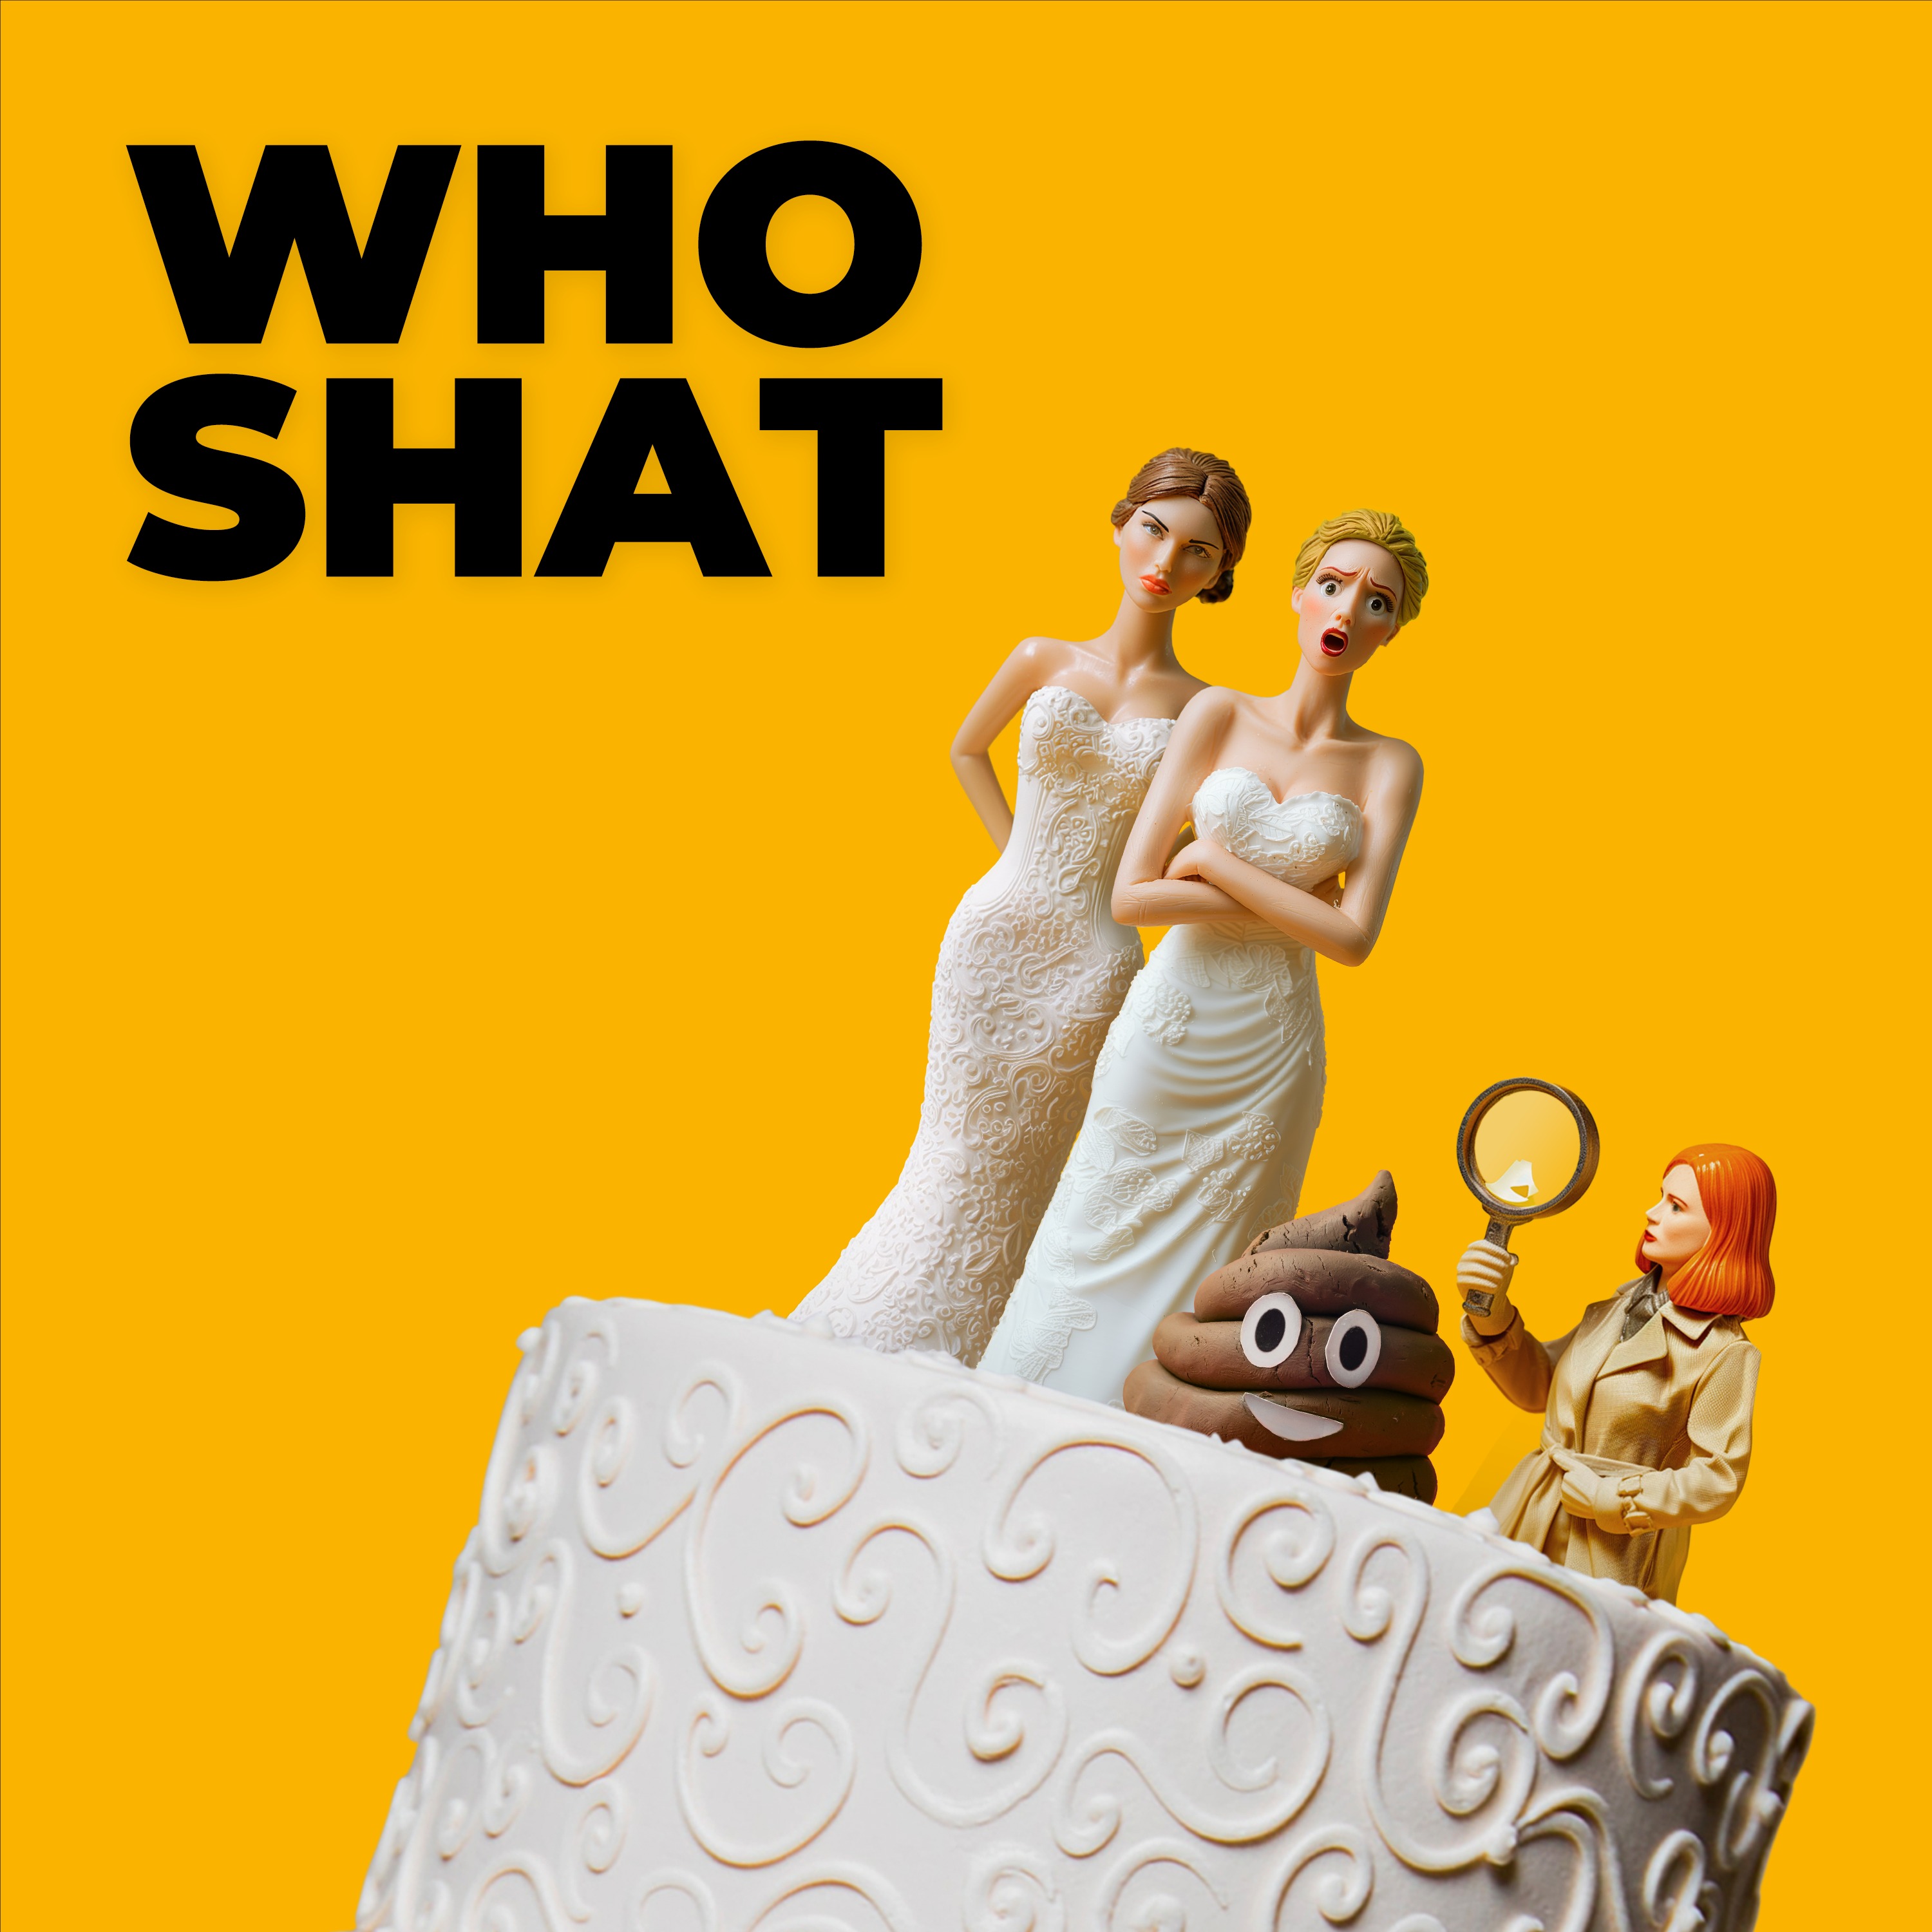 Who Shat On The Floor At My Wedding? And Other Crimes